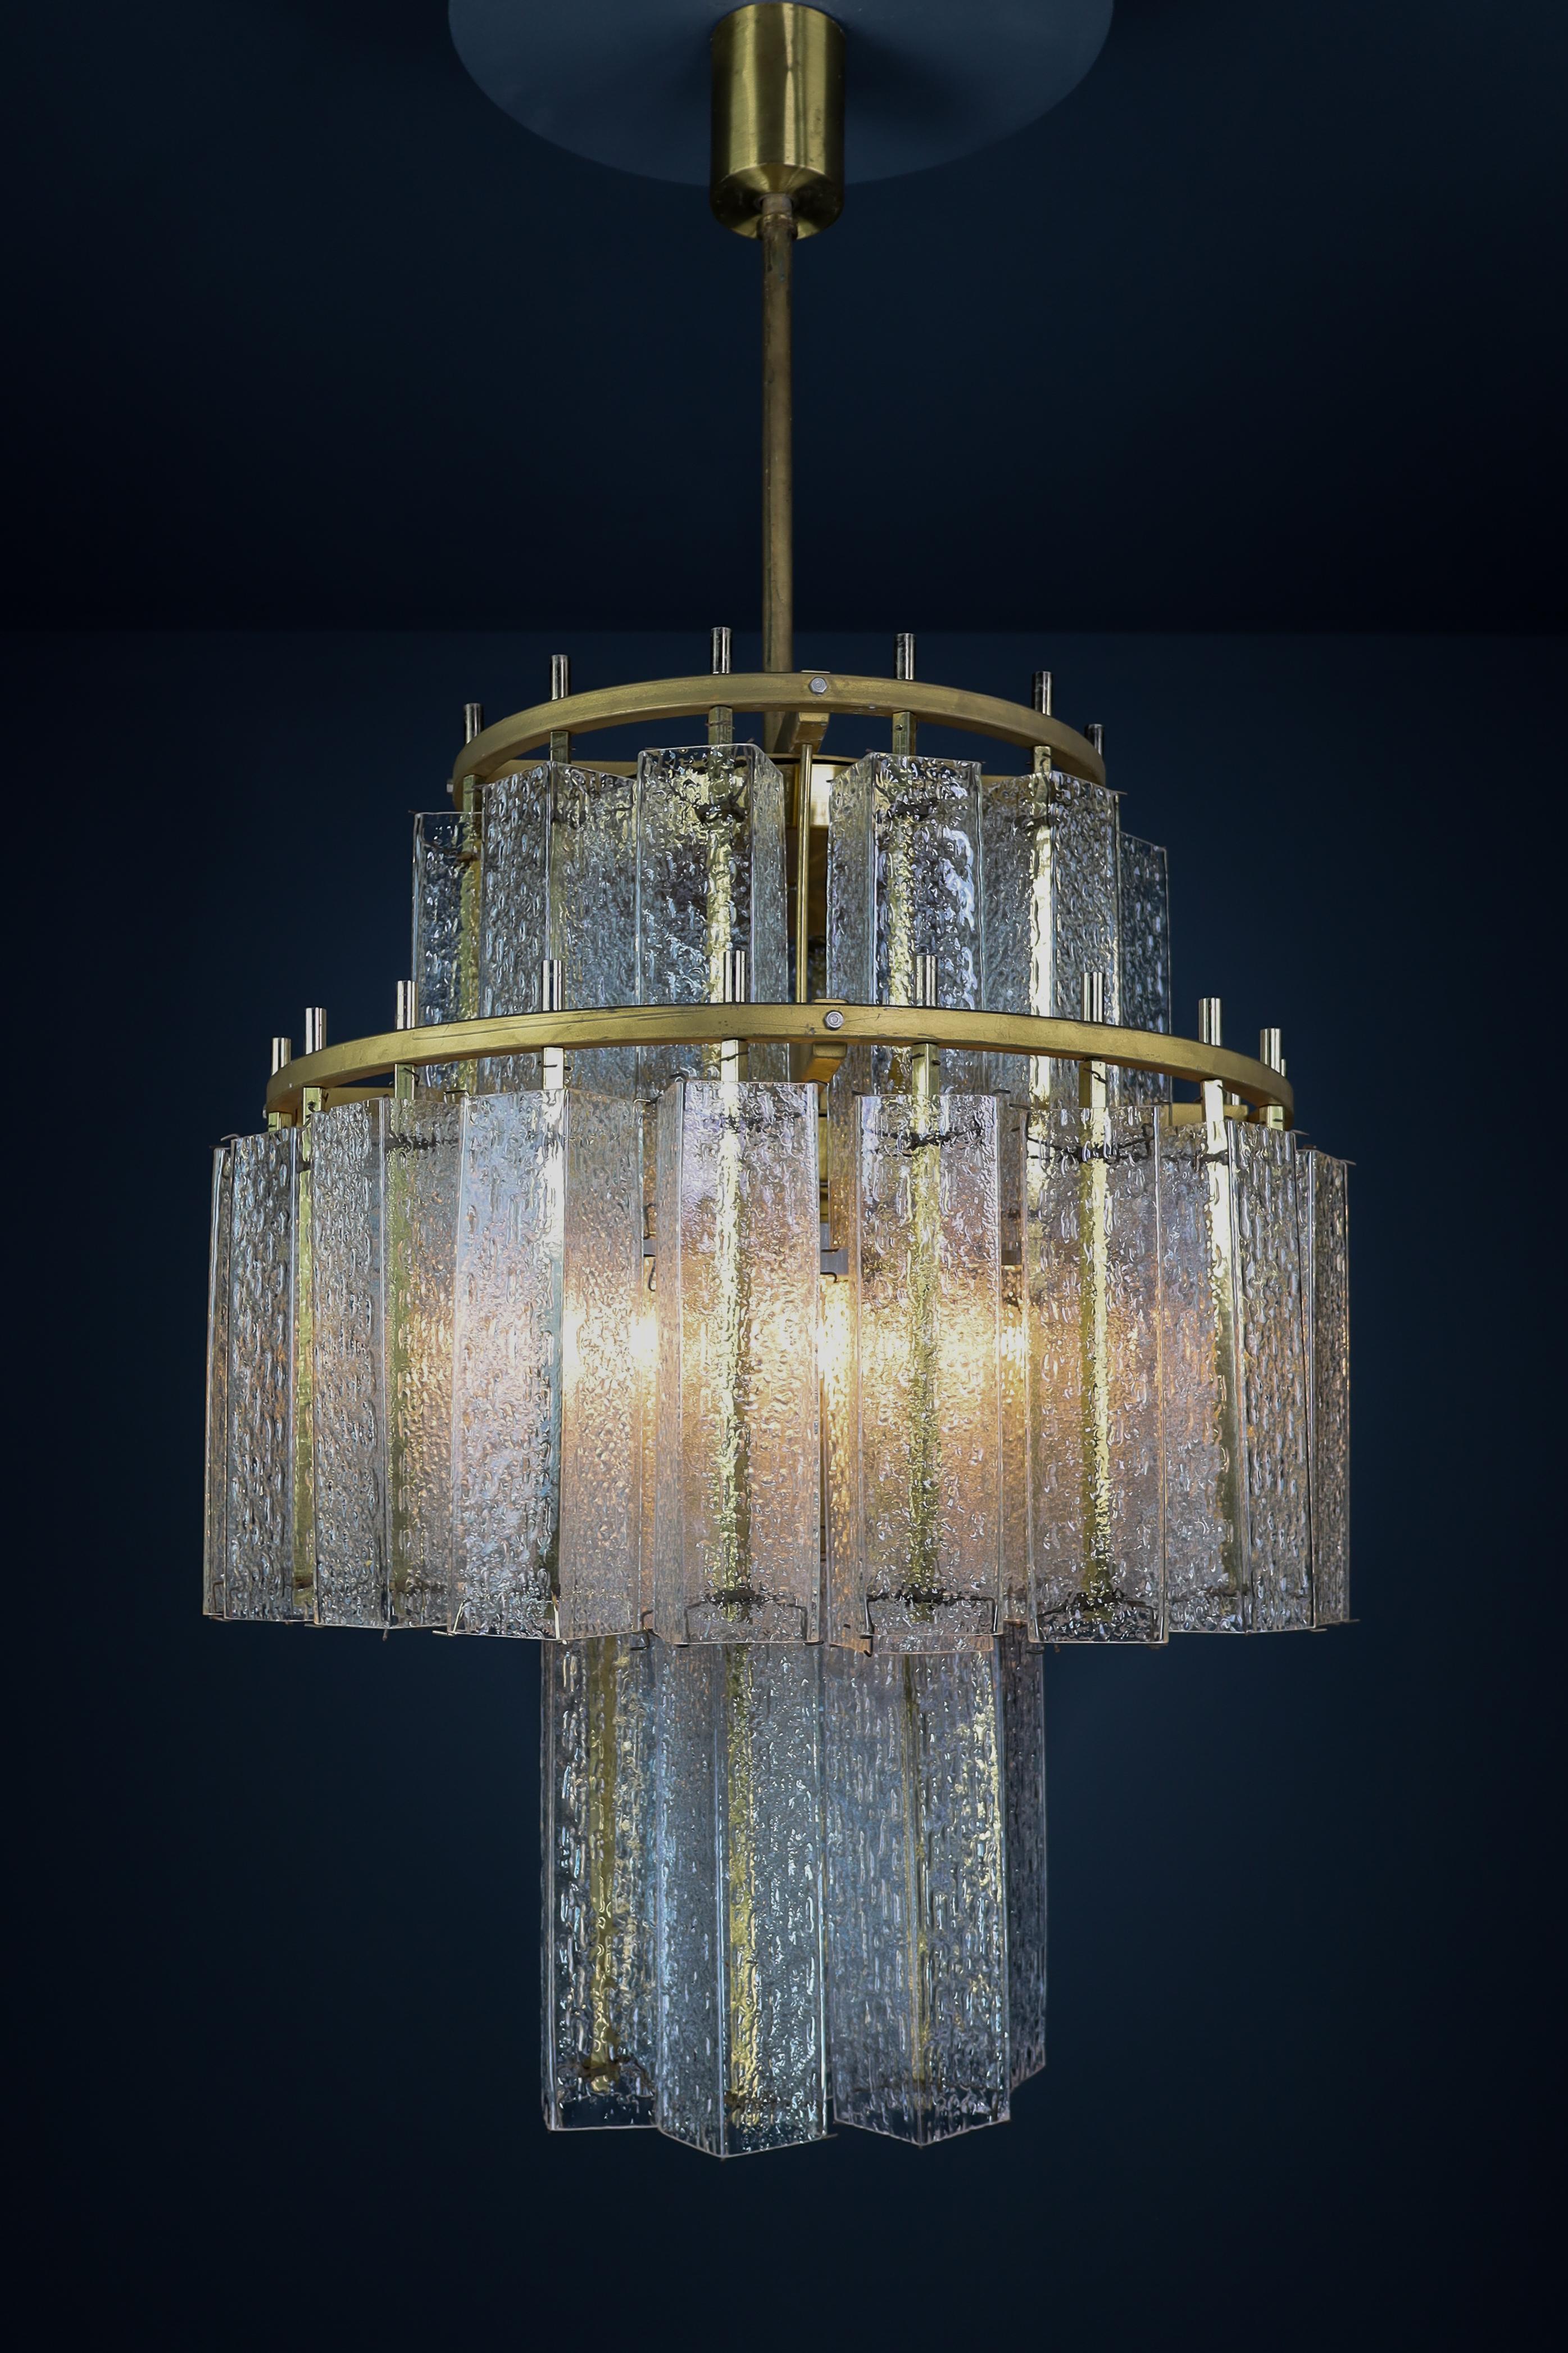 Le Grande XL Midcentury Chandelier In Brass & Structured Ice Glass, Austria 1950 For Sale 1